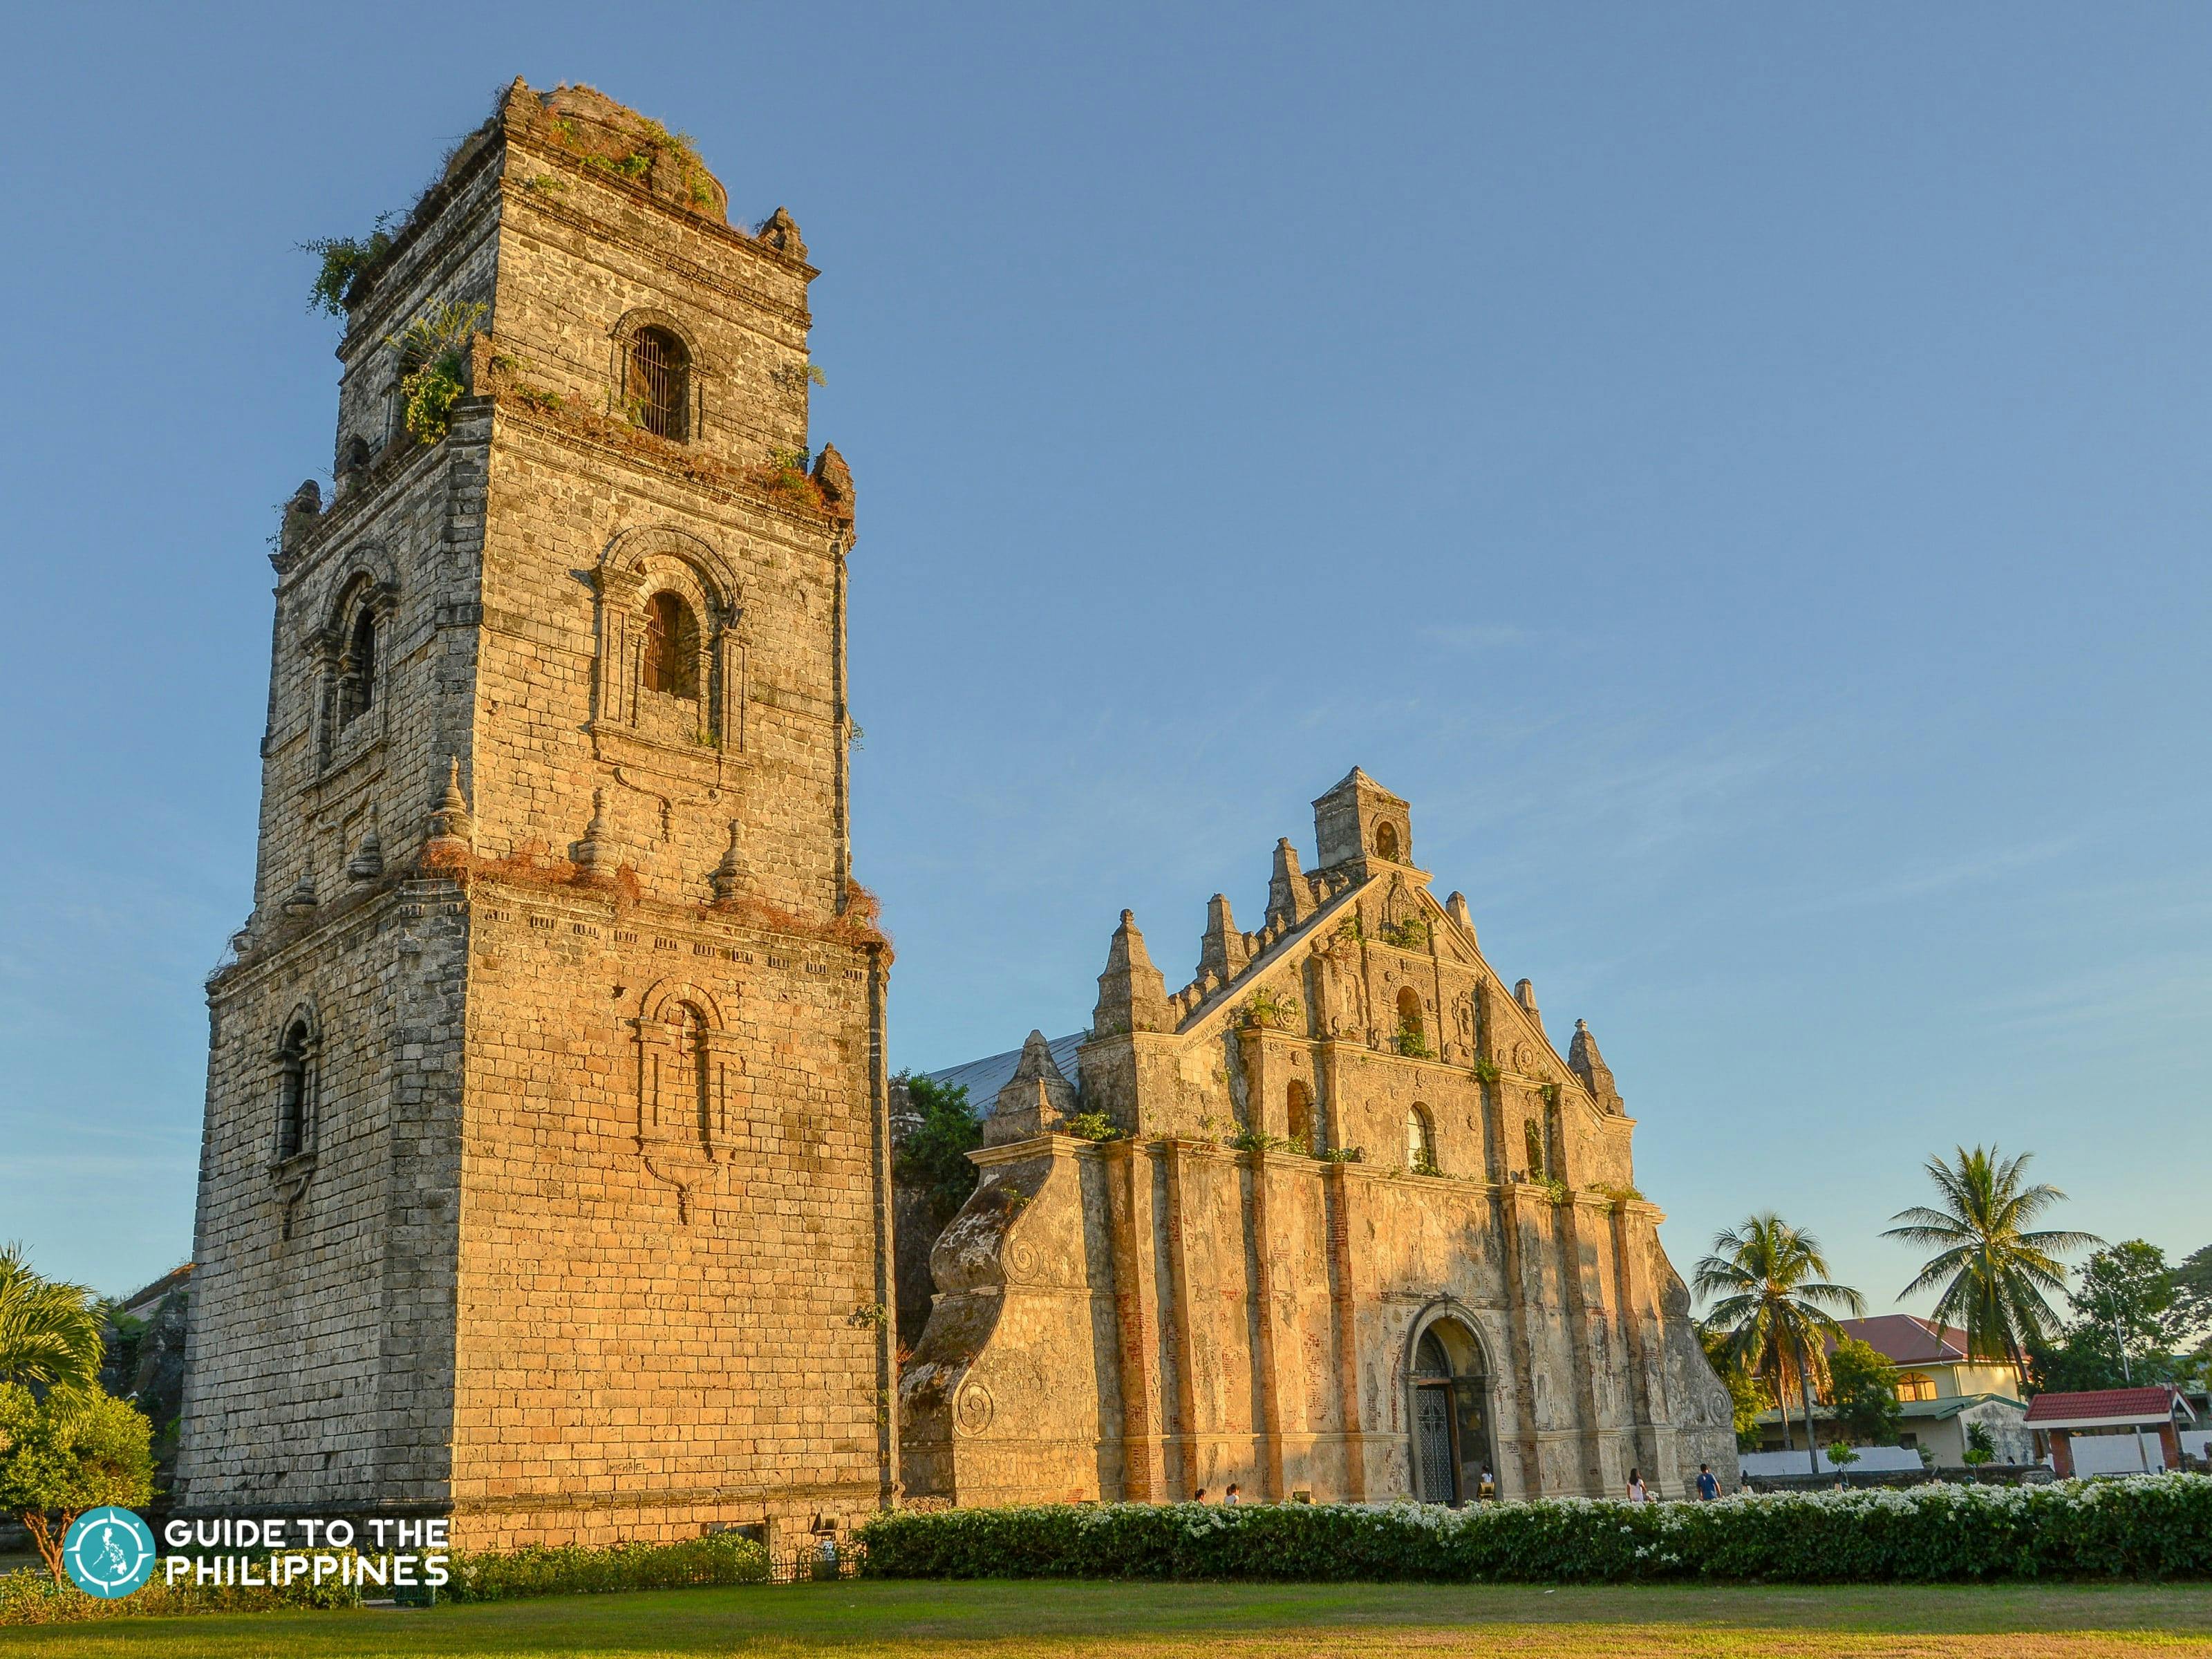 Sunset in Paoay Church in Laoag